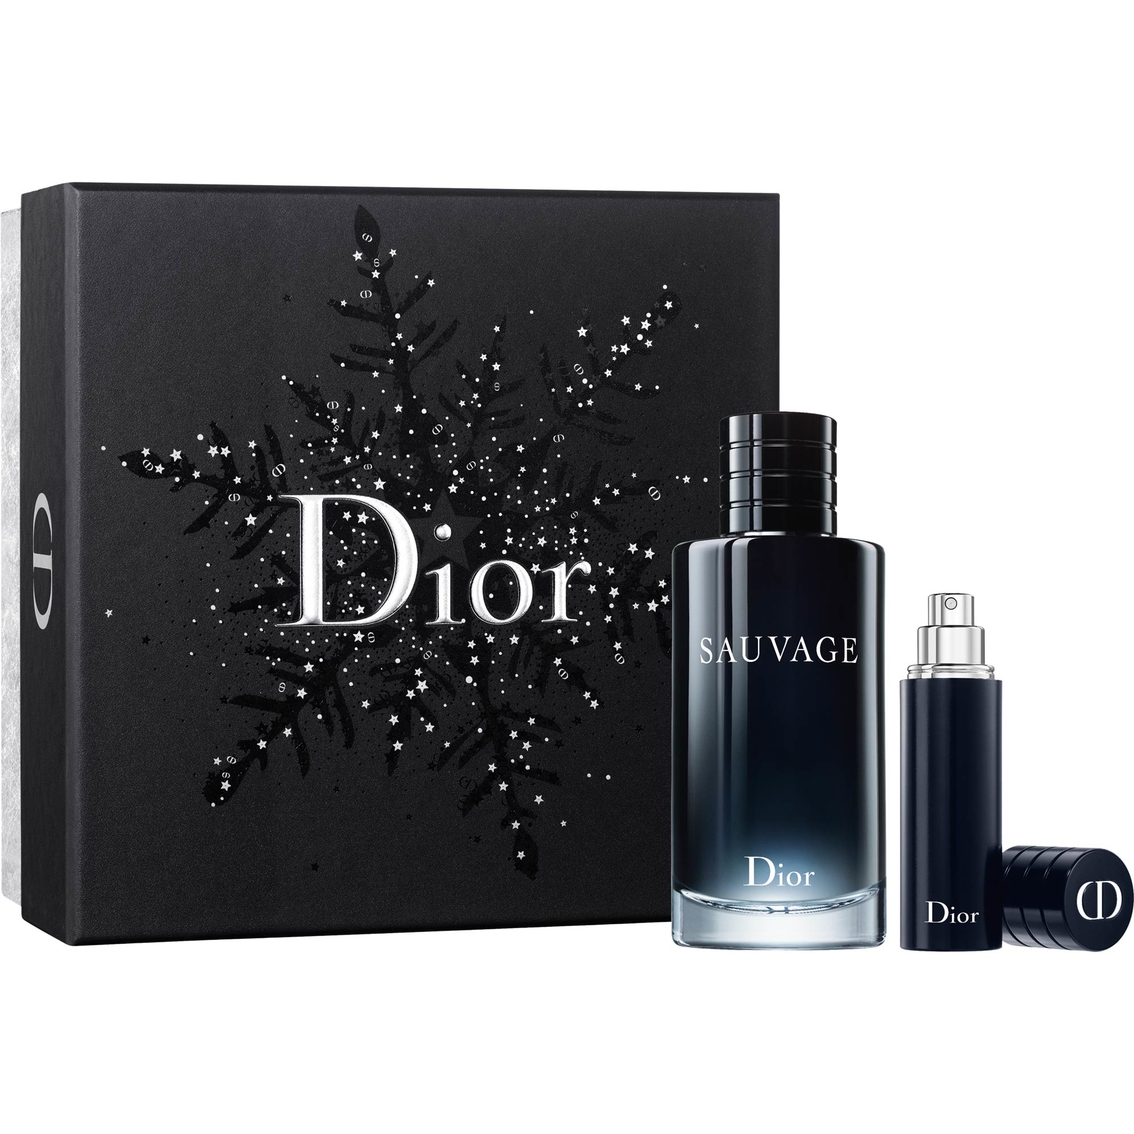 Dior Sauvage Gift Set | Gifts Sets For 